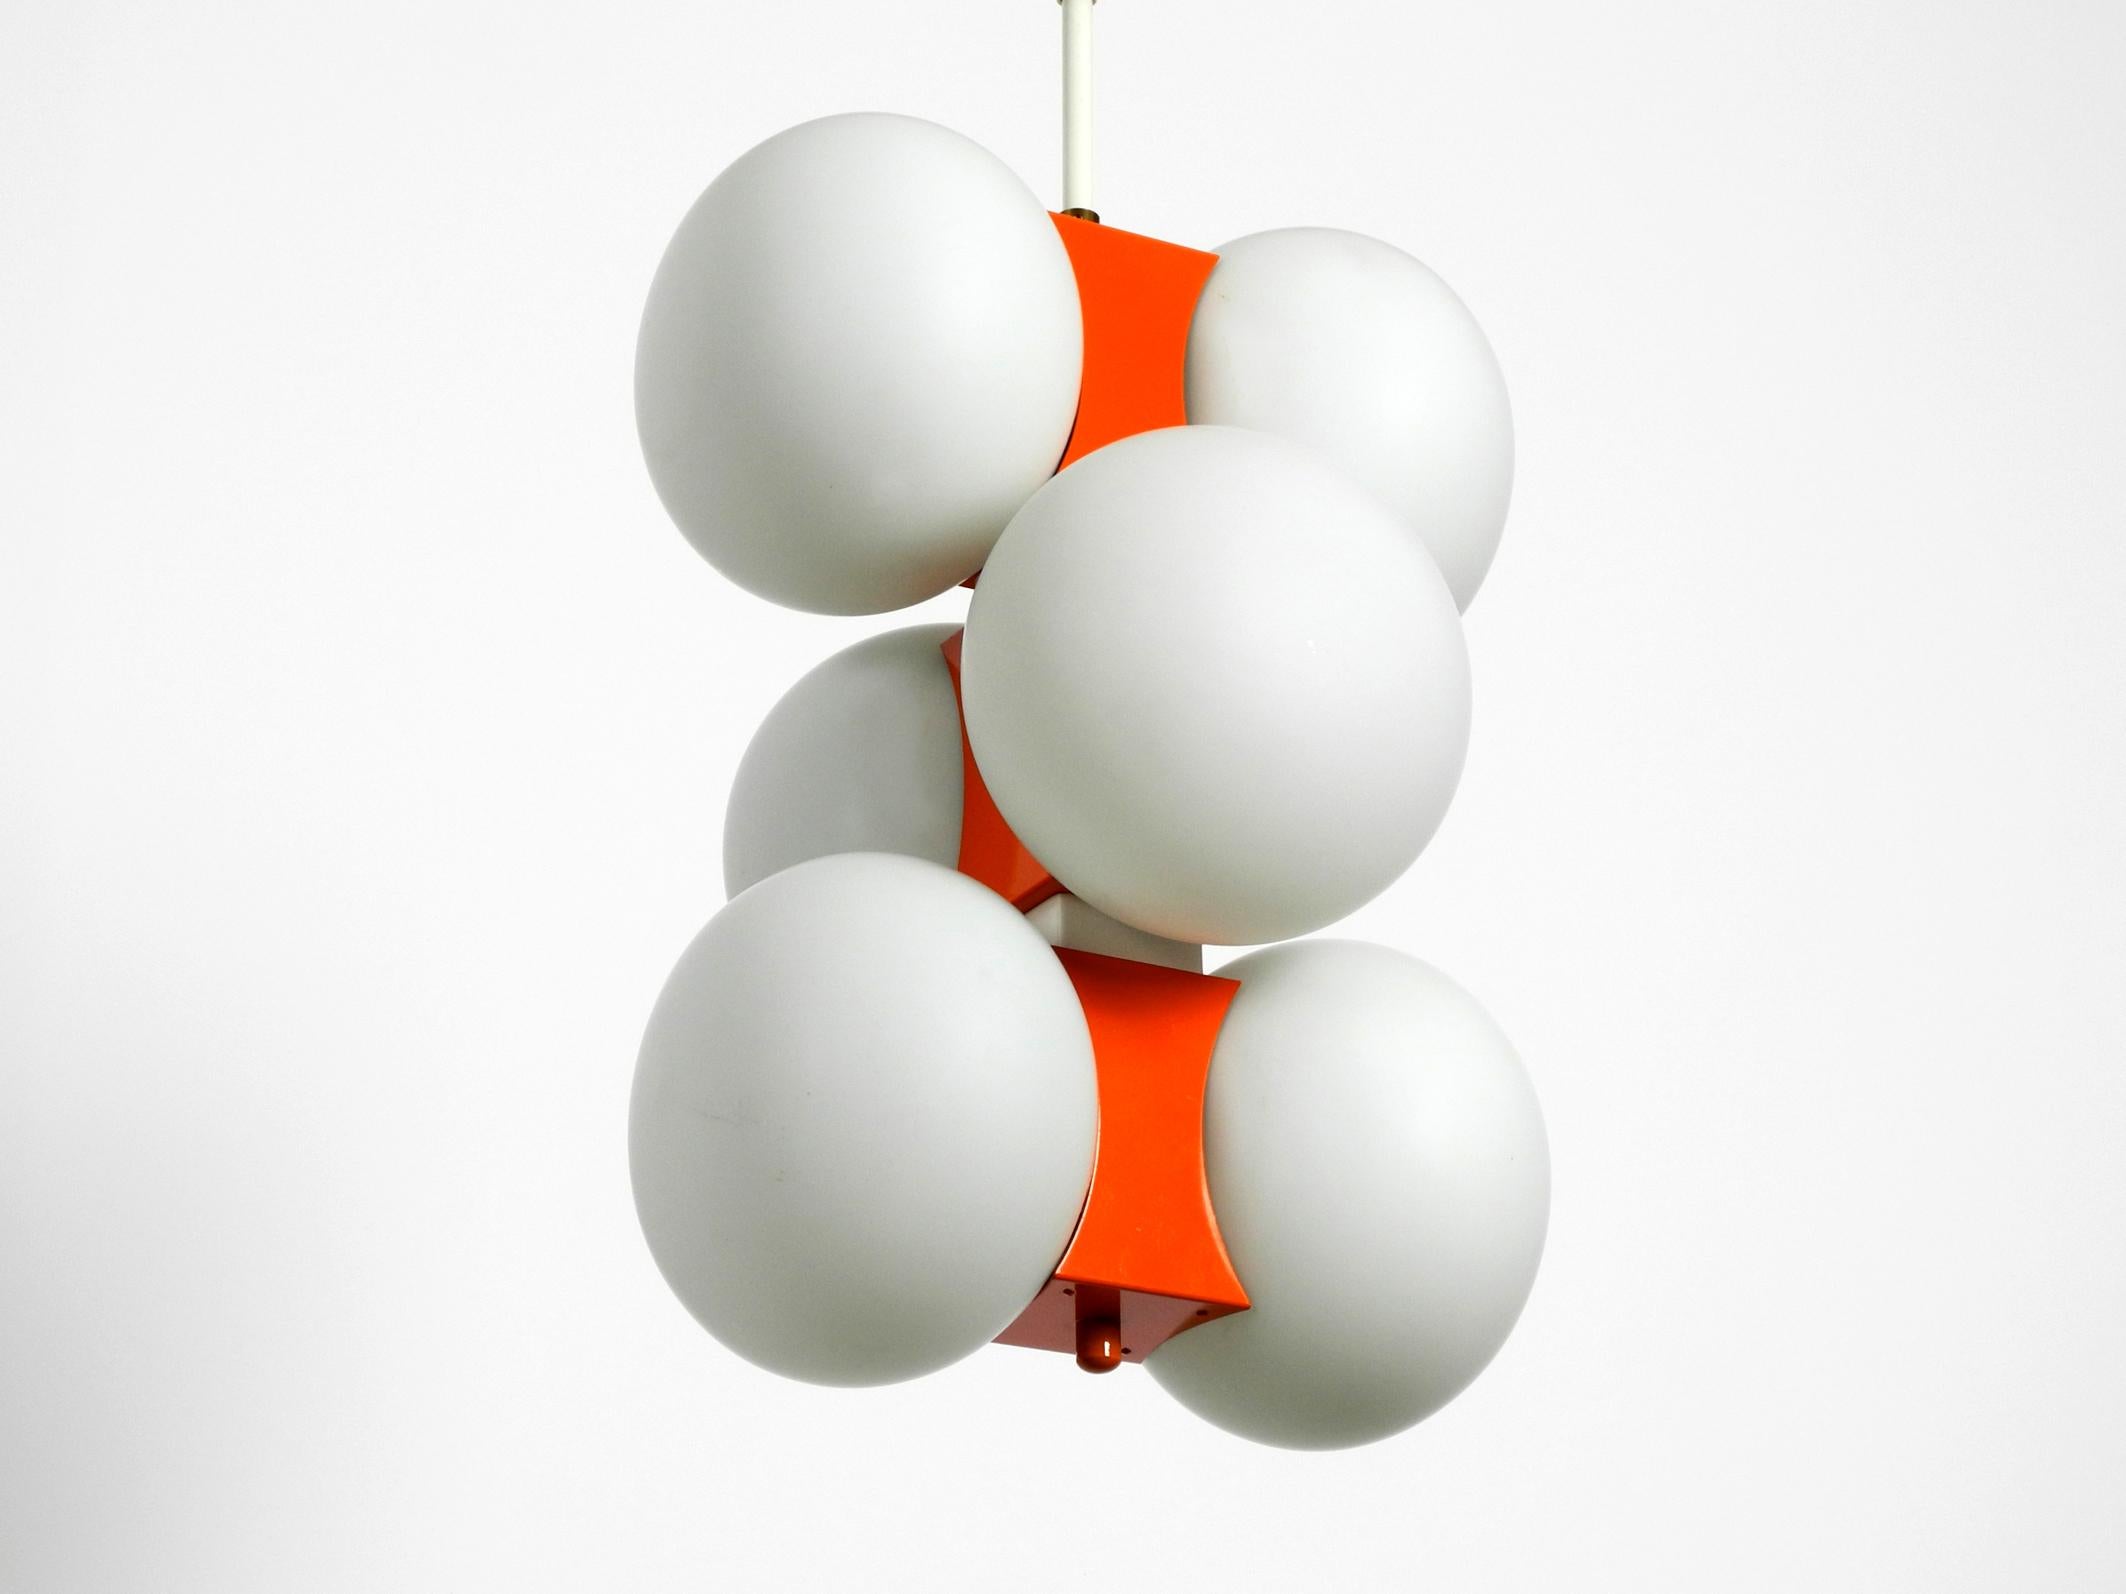 Beautiful rare original 60s orange Kaiser metal ceiling lamp with 6 white opal glass balls.
Beautiful sixties Space Age Atomic Design.
100% original condition with fantastic condition, hardly any usage traces to see.
Fully functional with six E14